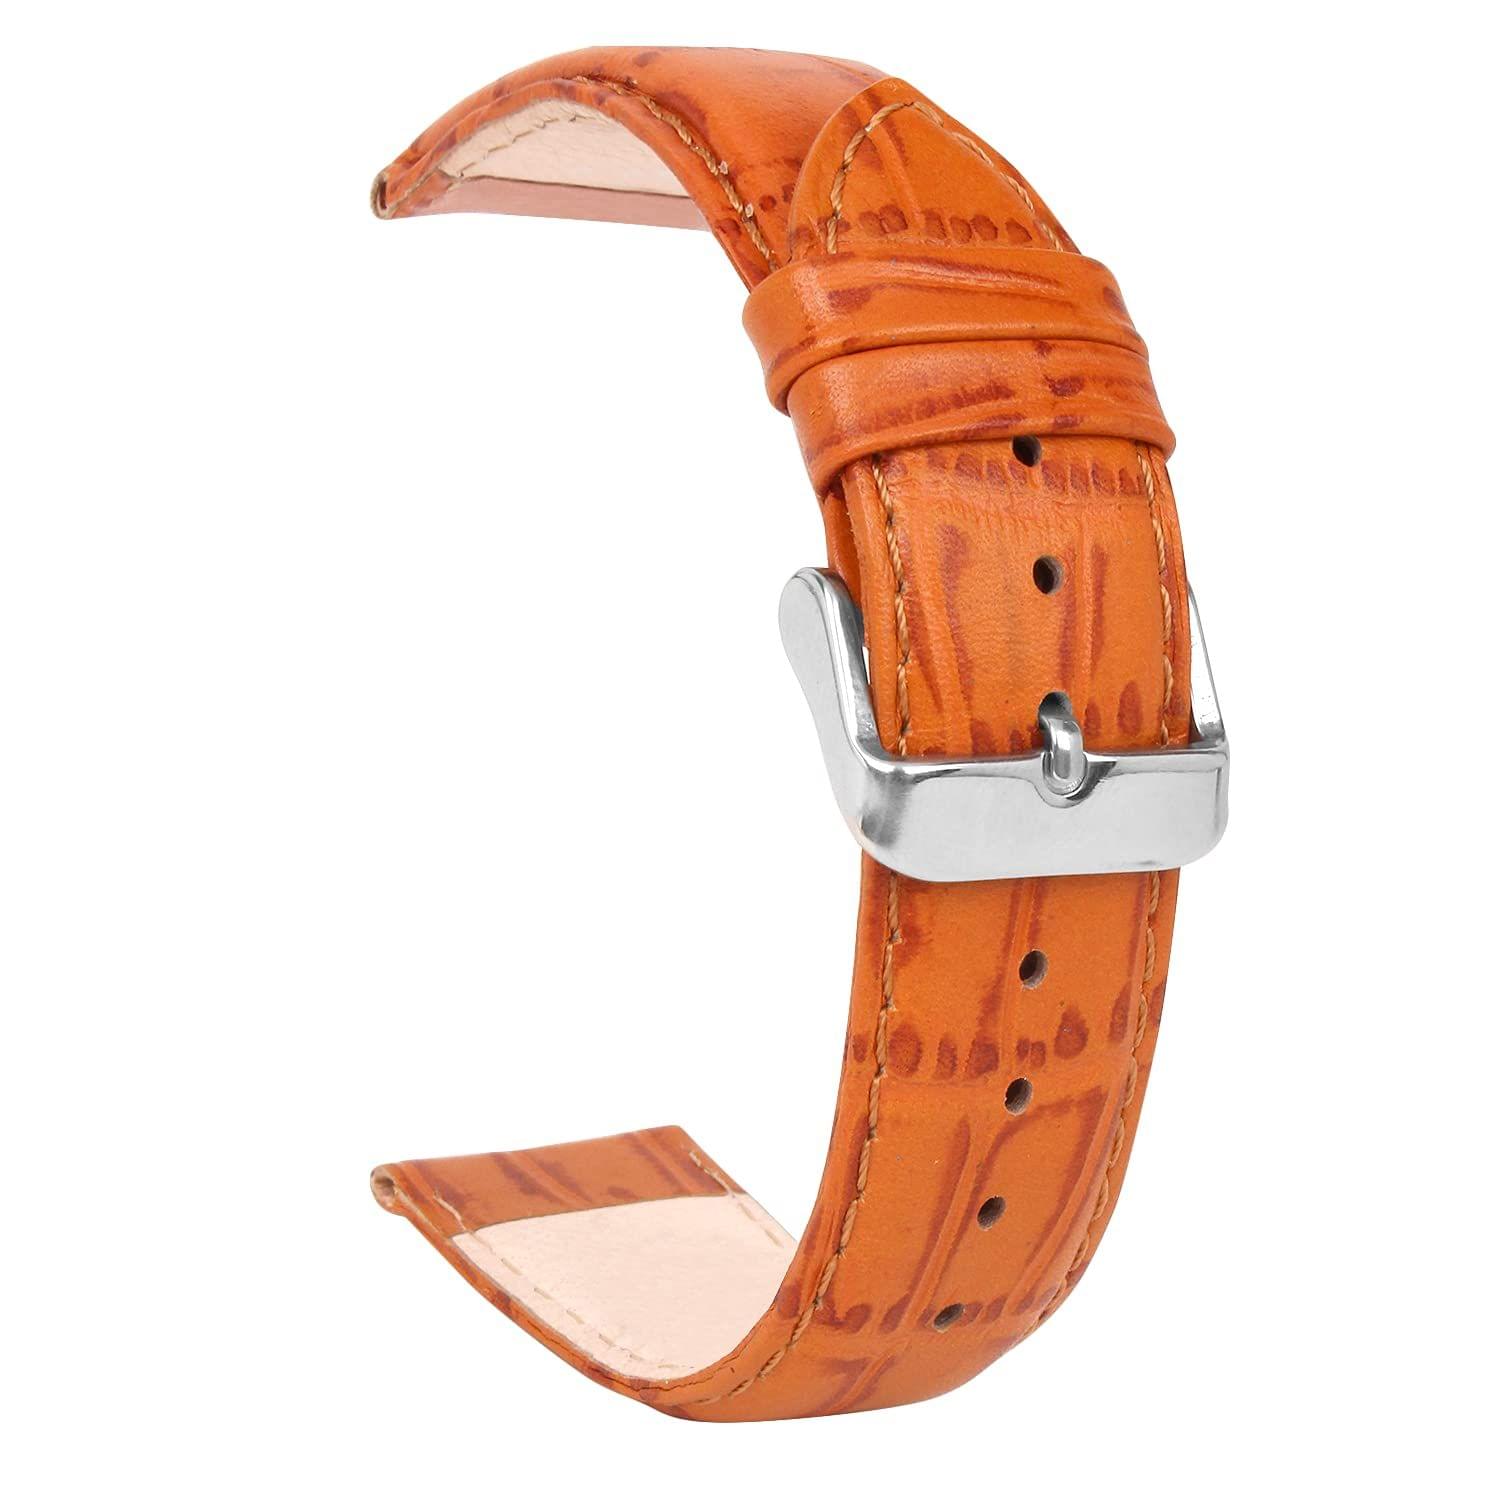 Ritche Genuine 18mm Leather Watch Band Classic Vintage Quick Release  Leather Watch Strap (Toffee Brown), Valentine's day gifts for him or her |  Amazon.com